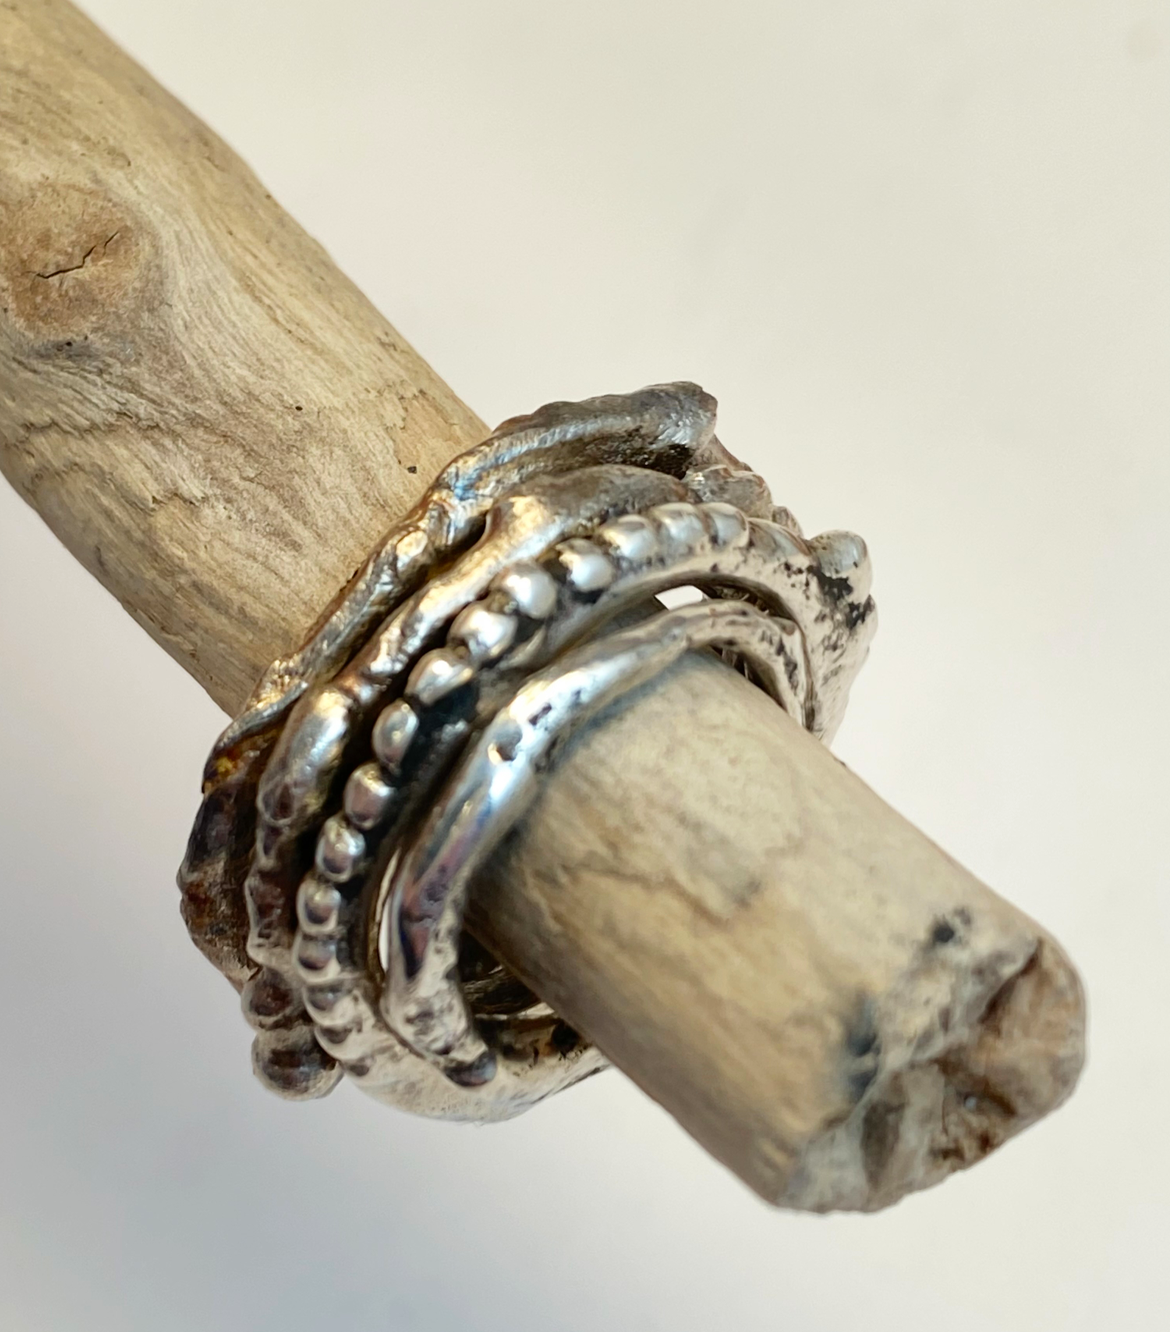 Melty rings can be ordered in any size. Wonderful as a stack. Each melty ring has an original organic design. Designed by fire and metal! Smooth and comfortable. Style: rustic, boho, funky, organic, earthy yet elegant